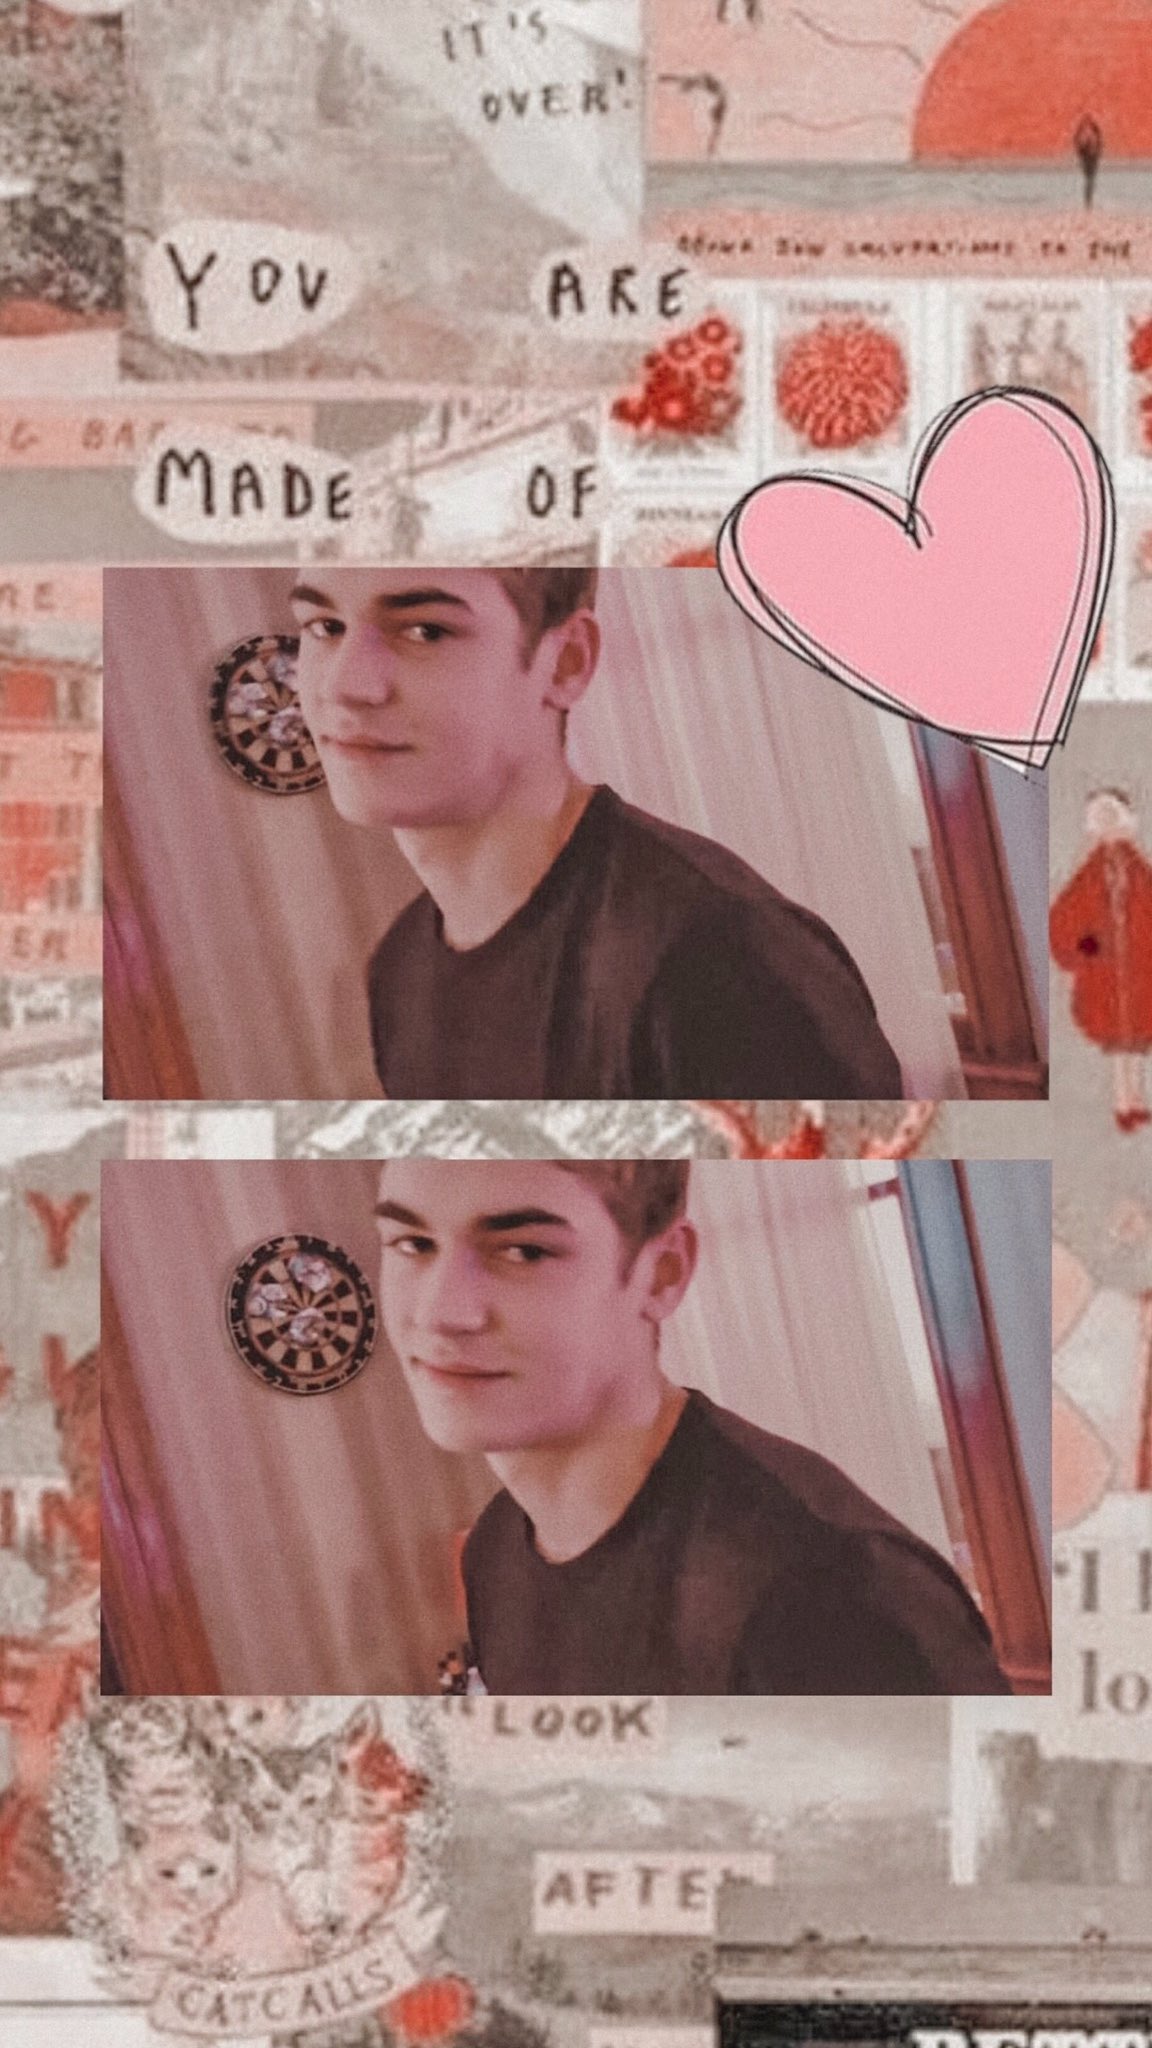 Best Of After josephine langford and hero fiennes tiffin ❤️ #aftermovie #hessa fav se gostar ✨ like if you liked rt se salvar ✨ rt if you save packs&wallpaper